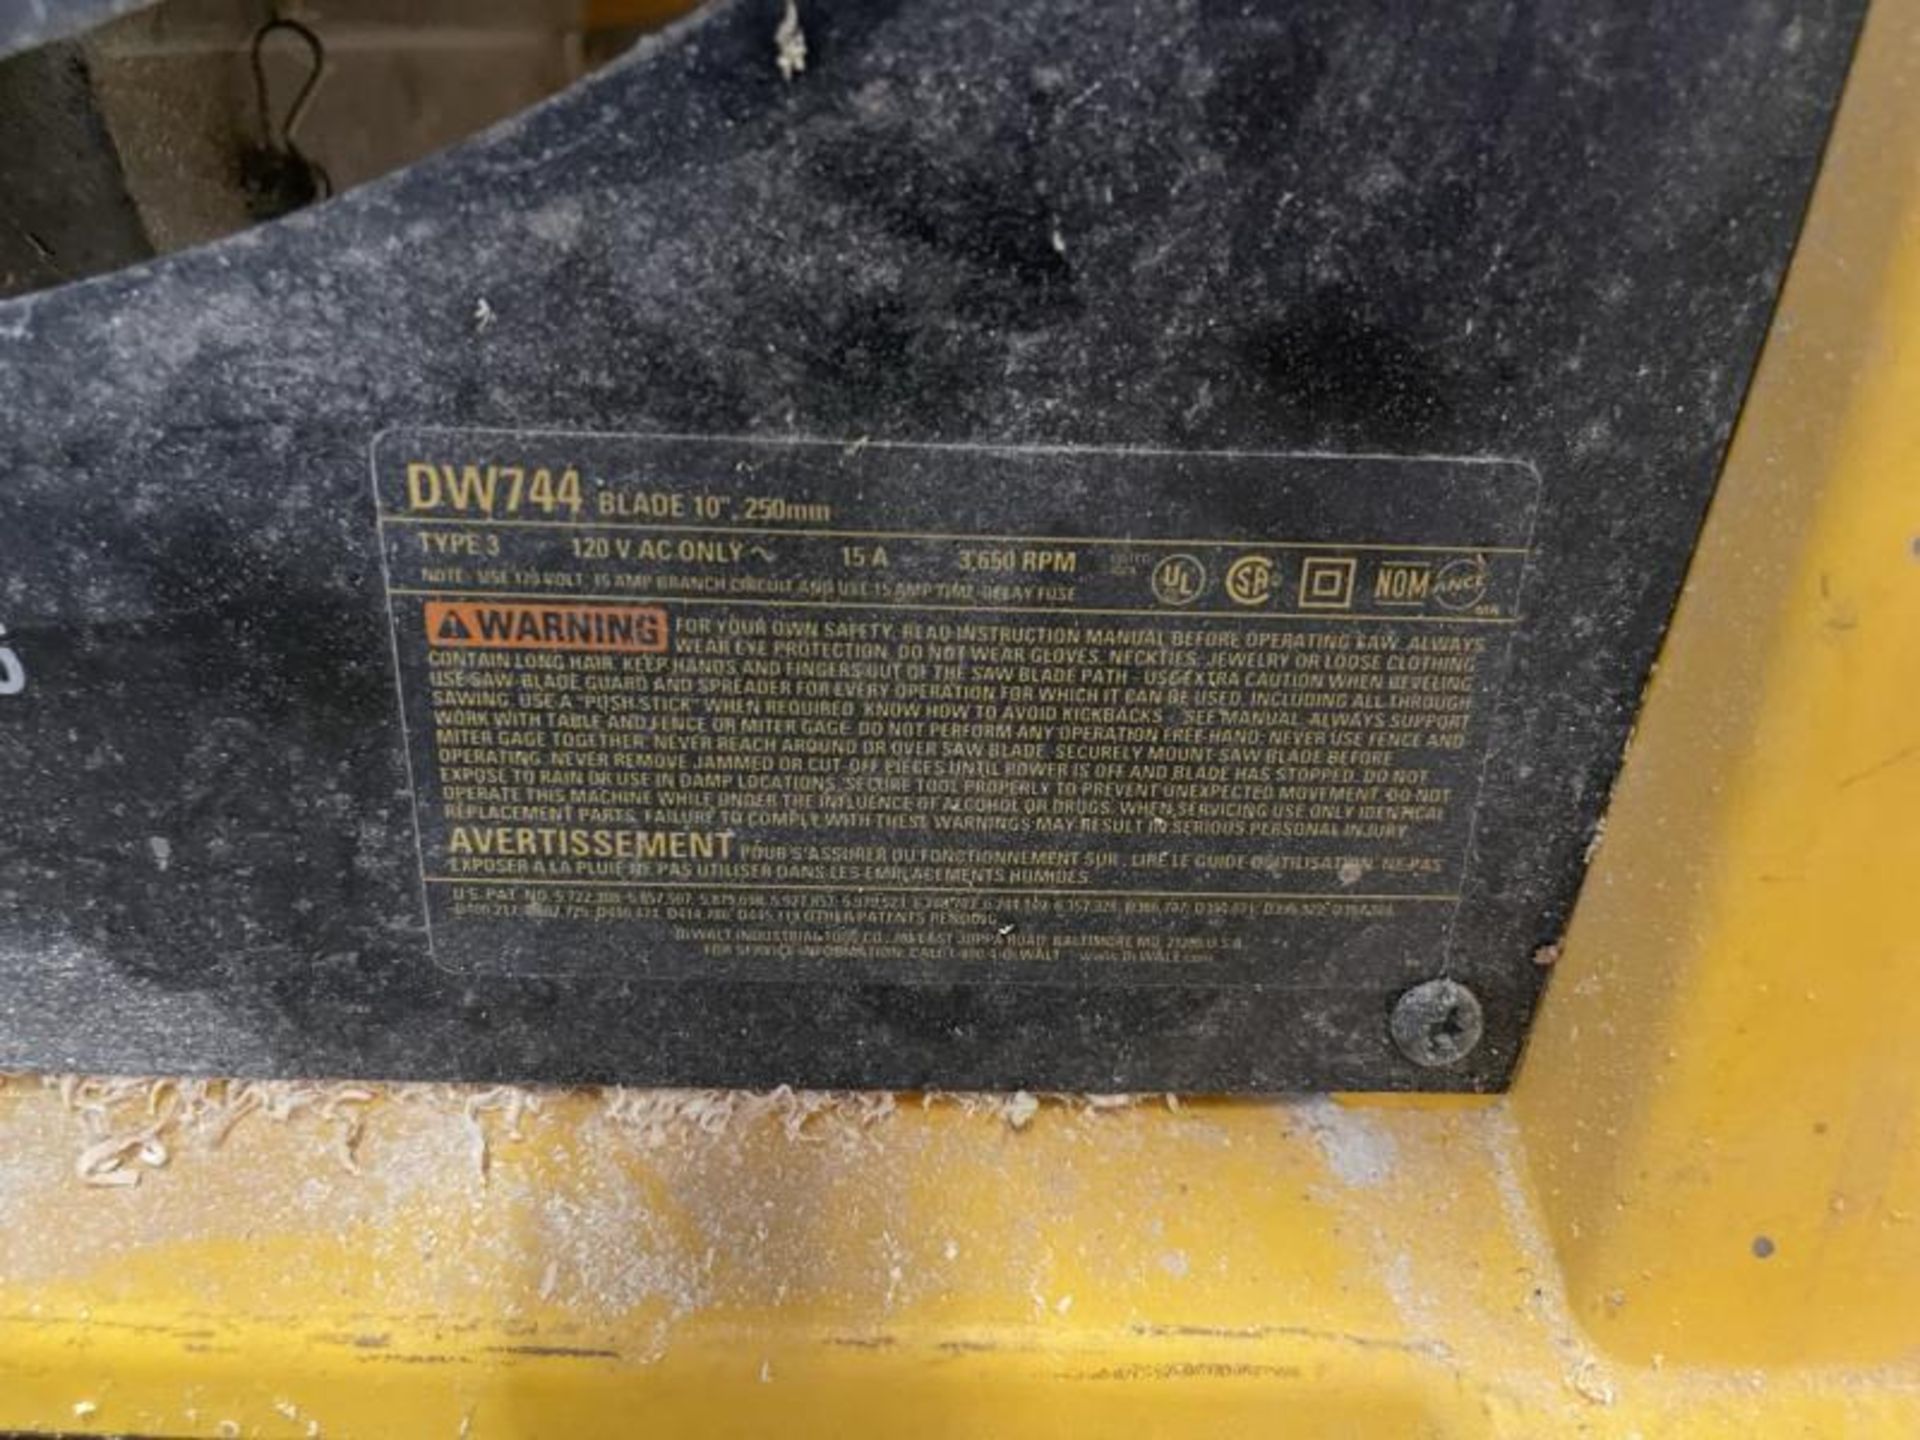 DeWalt collapsible Table Saw M: DW744 - Image 4 of 5